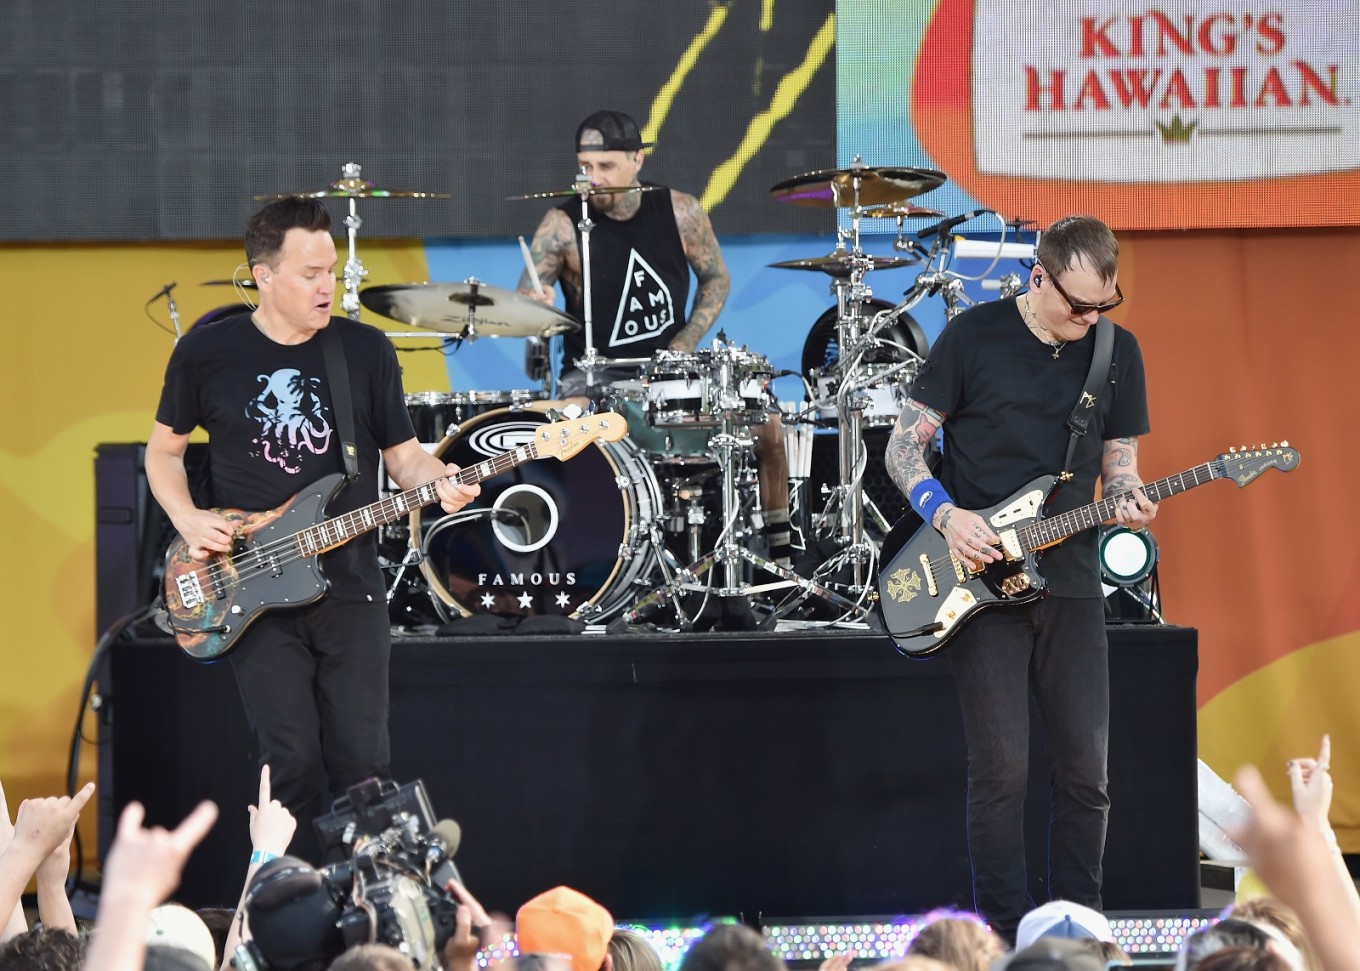 Blink-182 calls off shows after Linkin Park suicide - Entertainment - The Jakarta Post